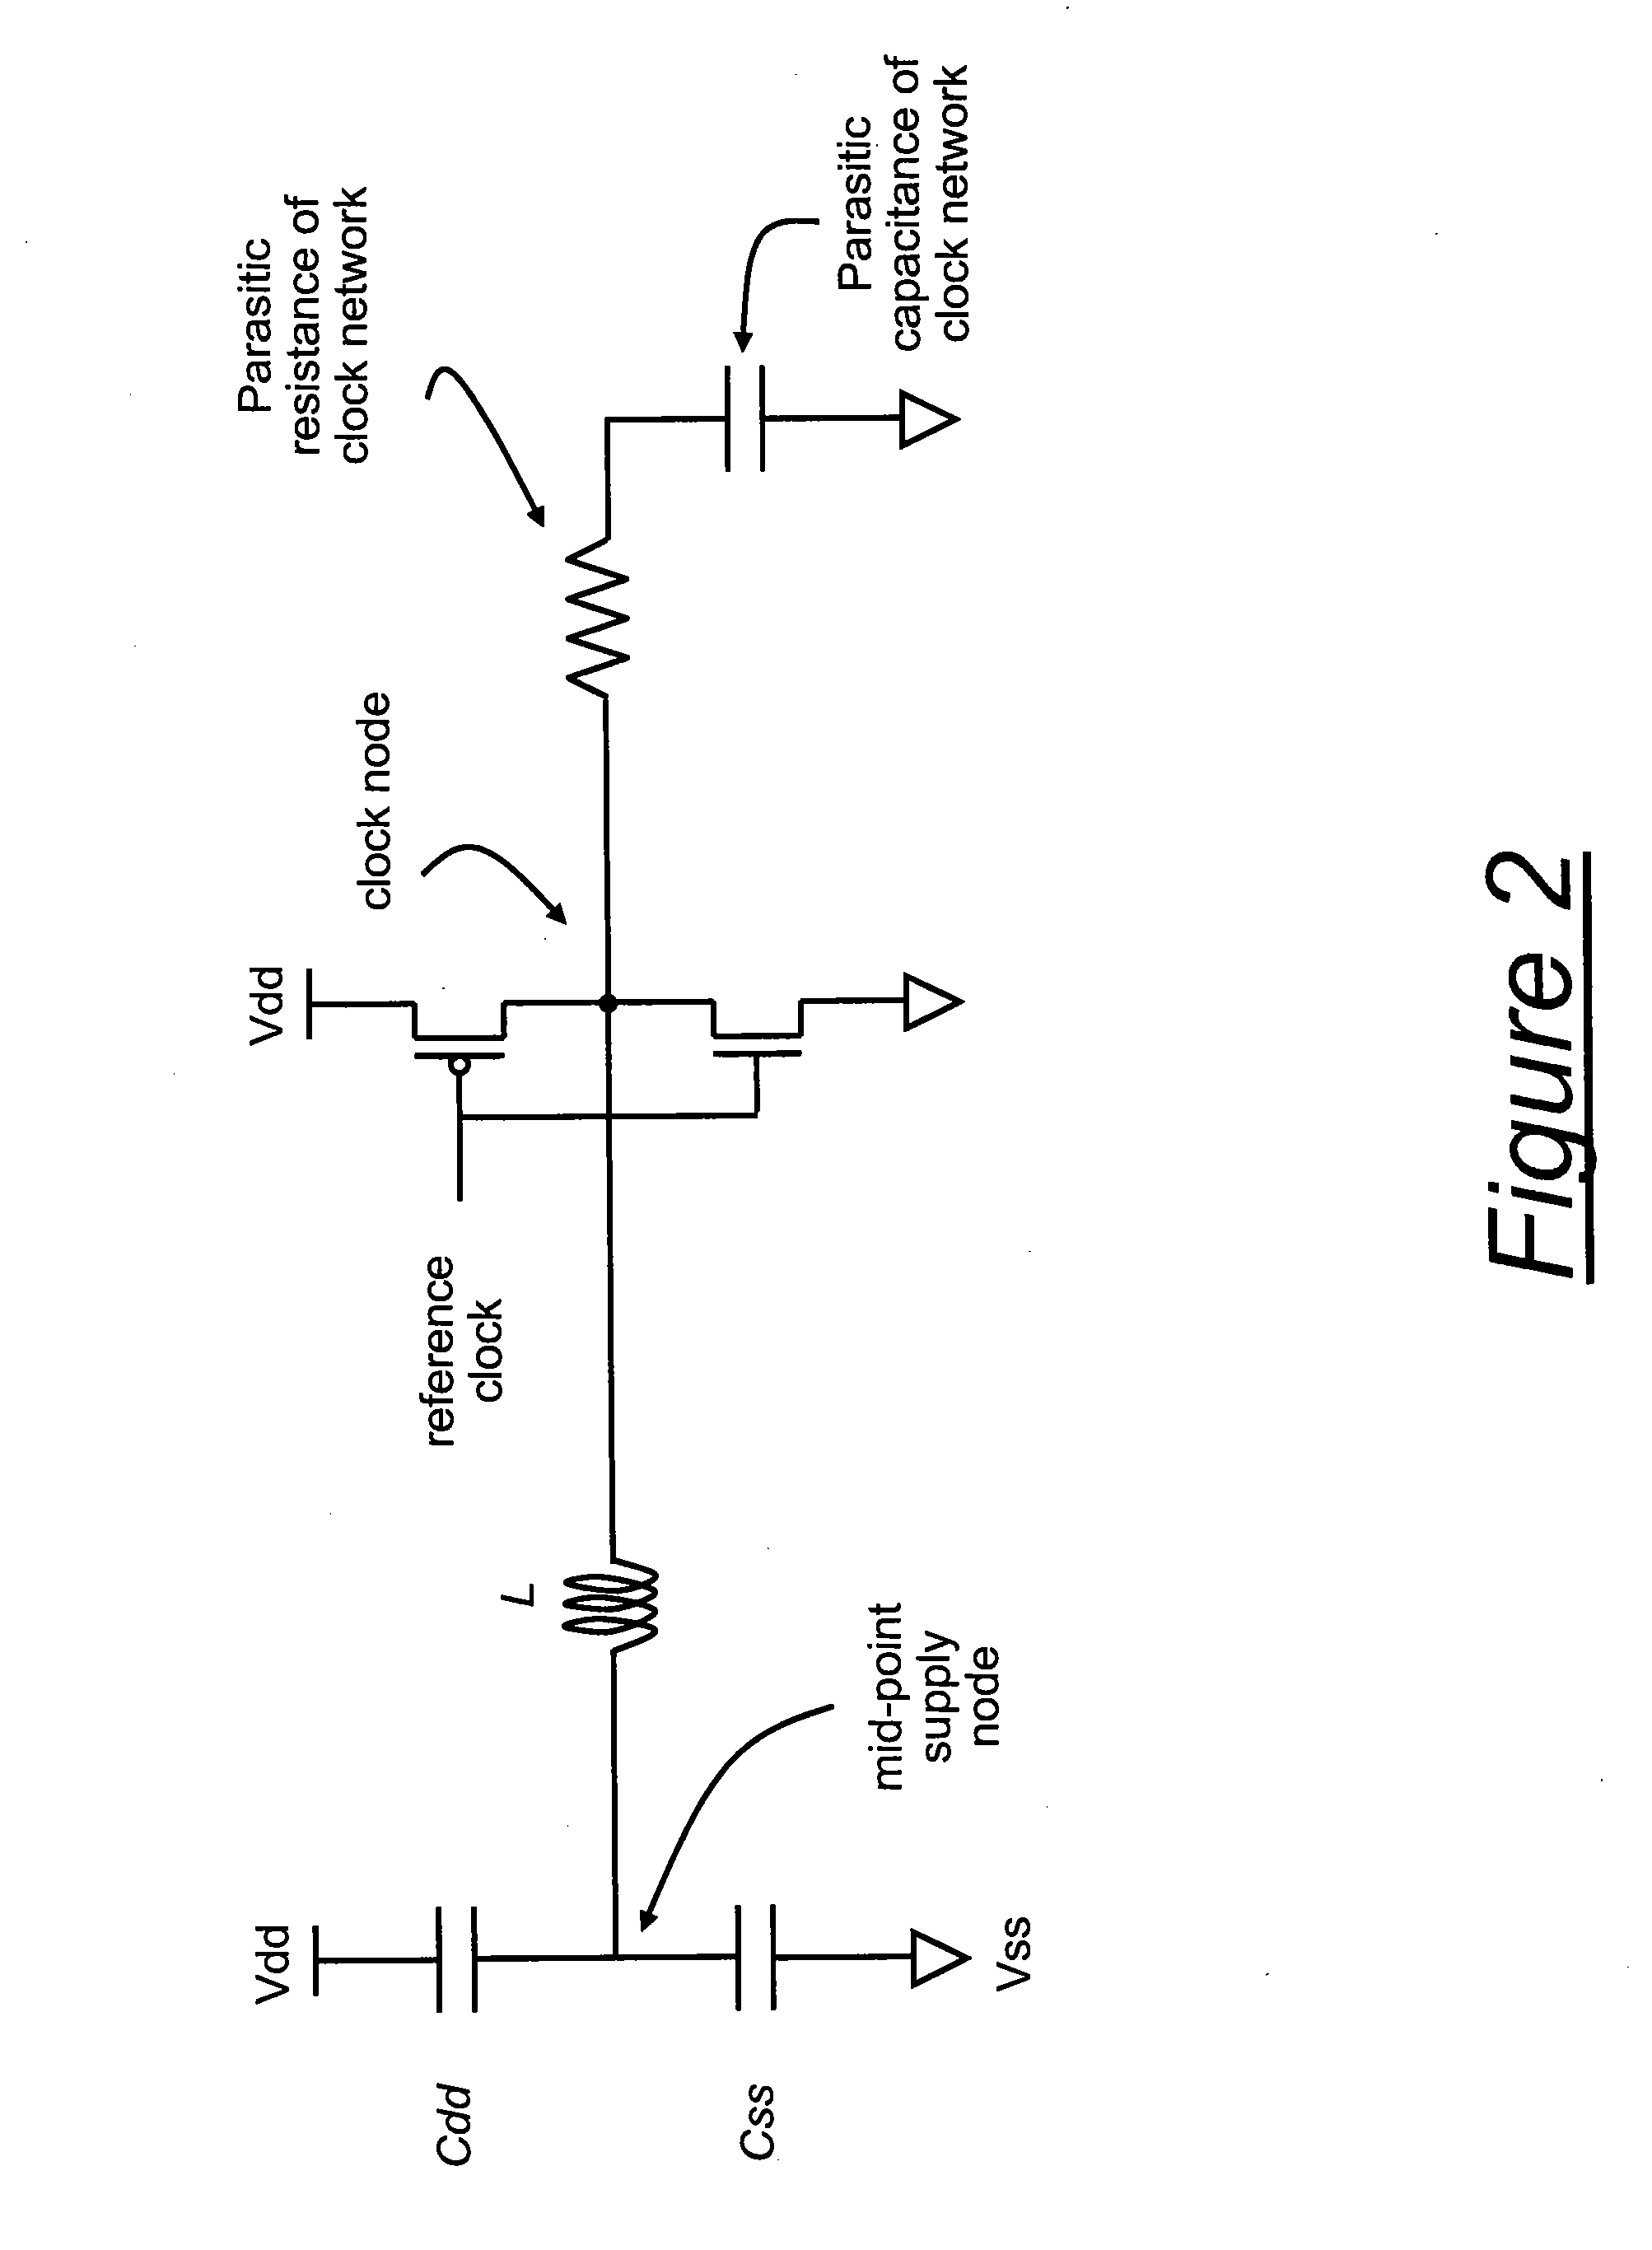 Architecture for operating resonant clock network in conventional mode